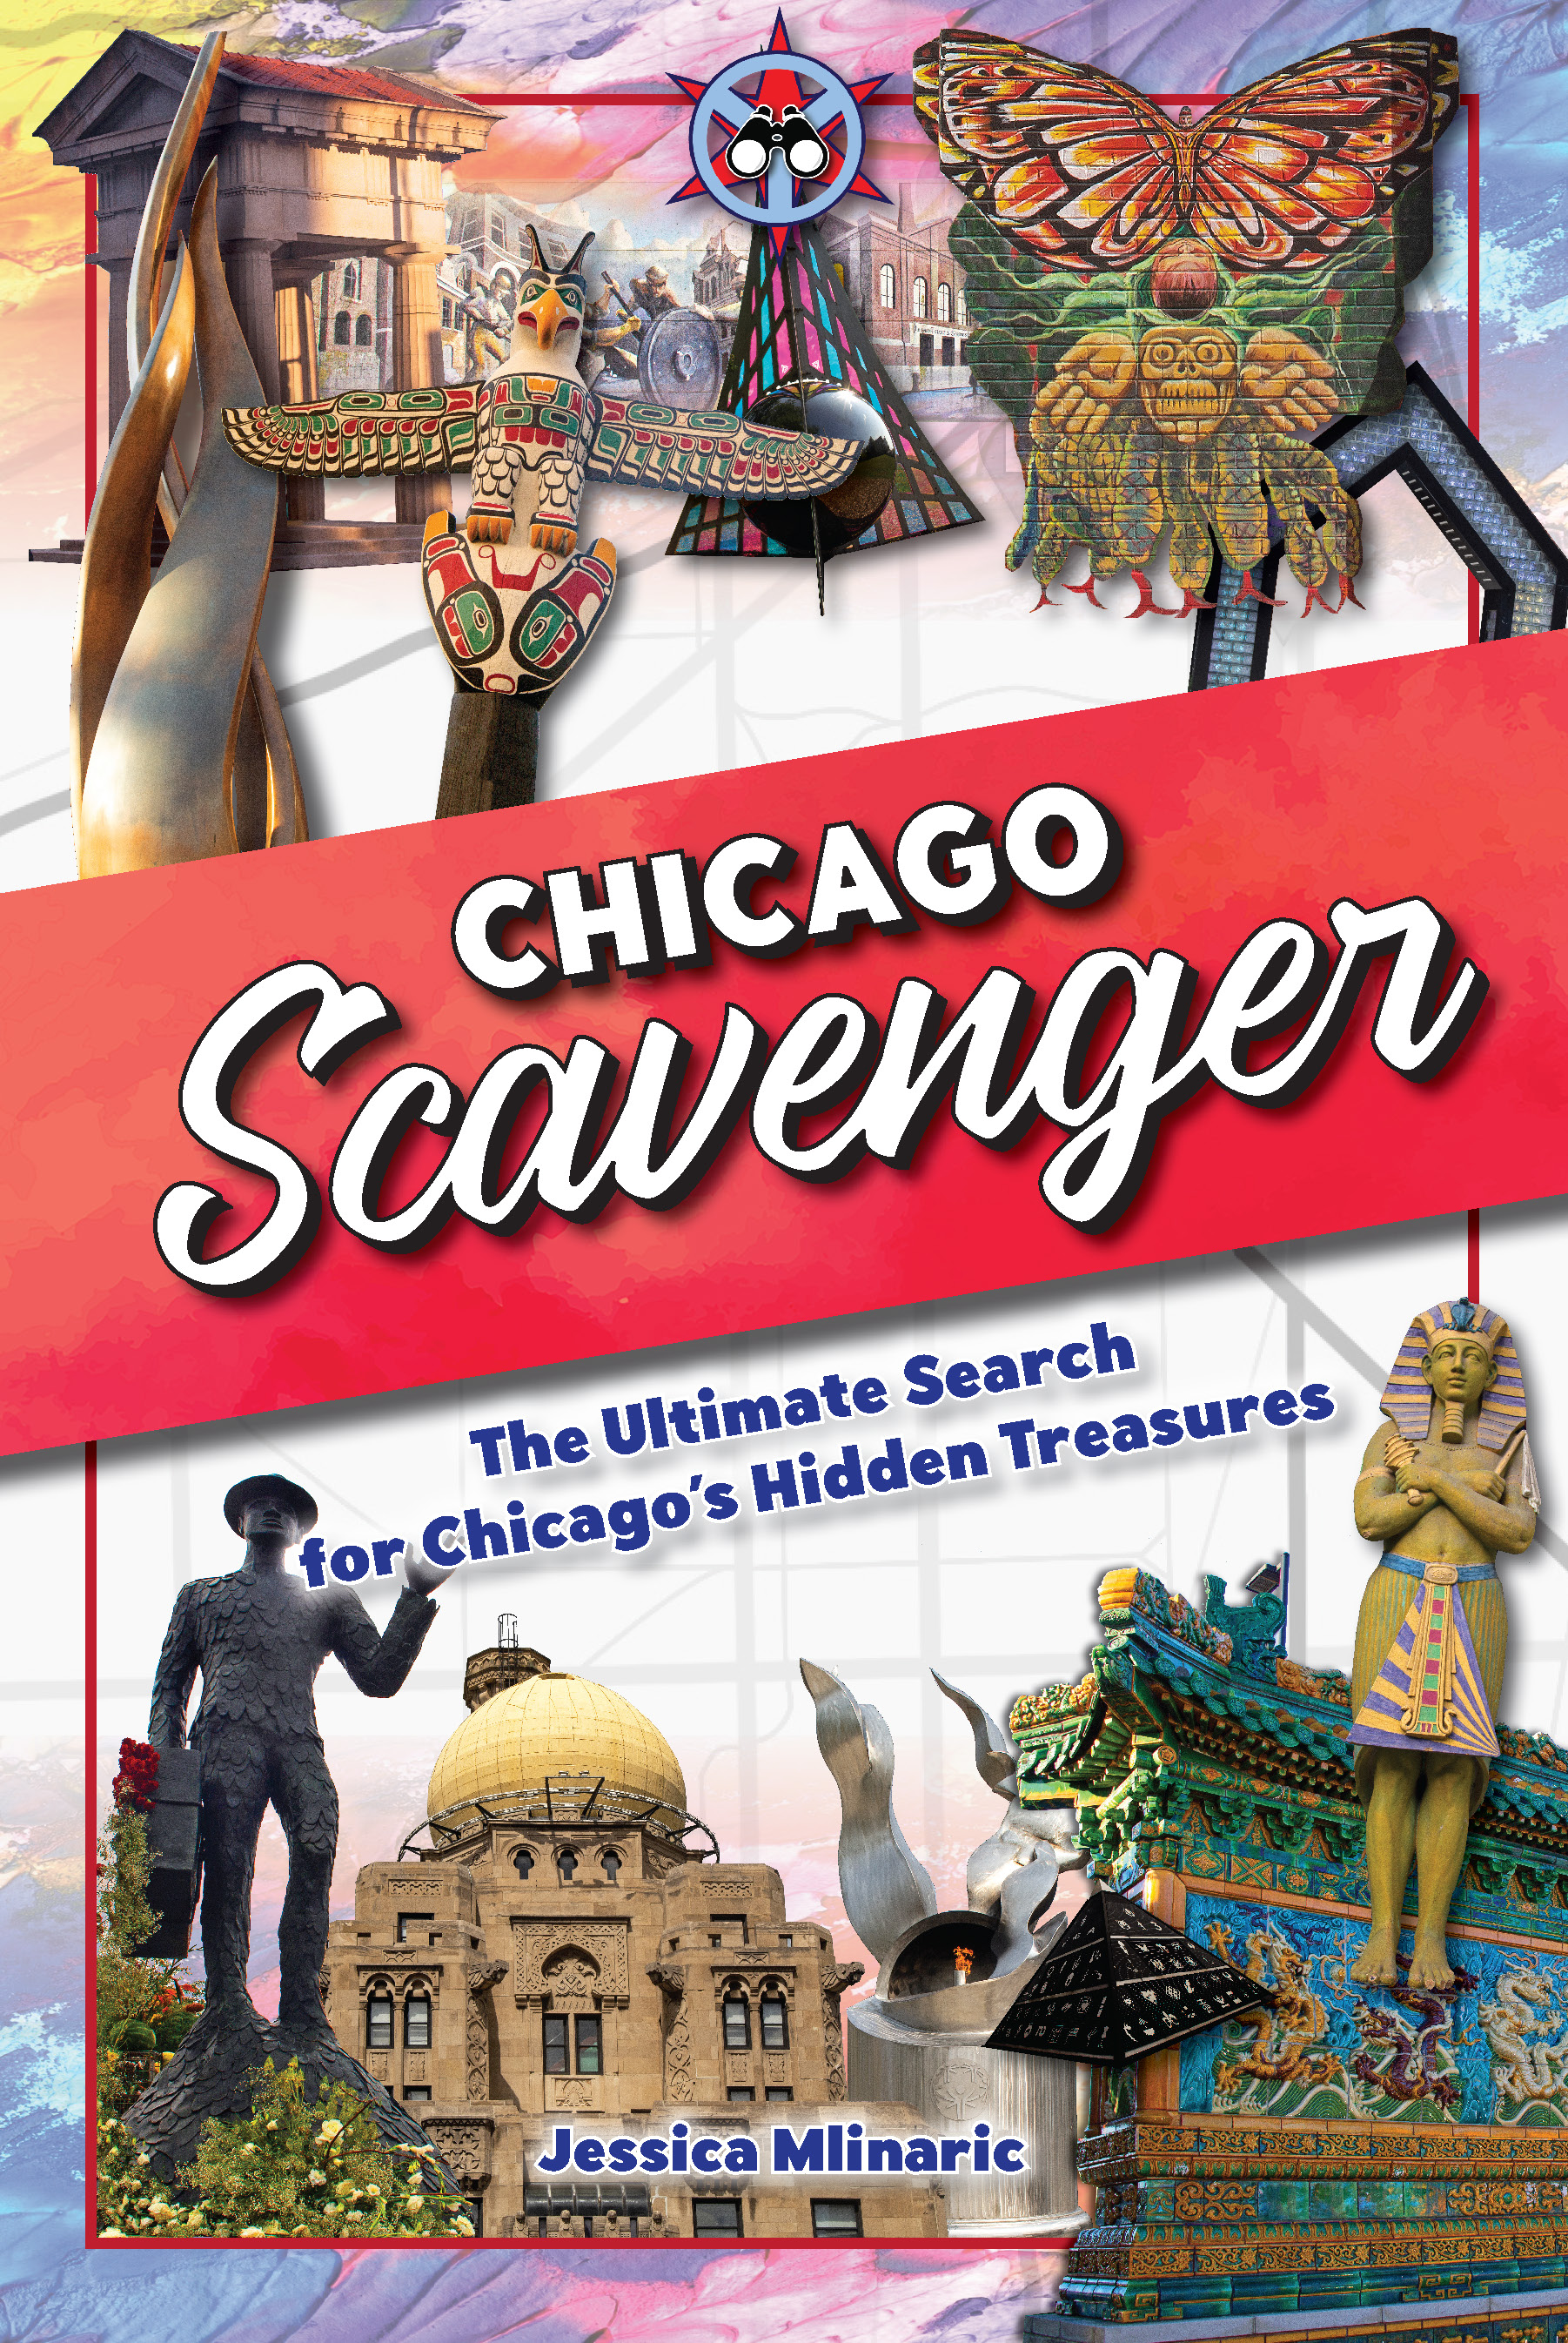 Chicago Scavenger by Jessica Mlinaric